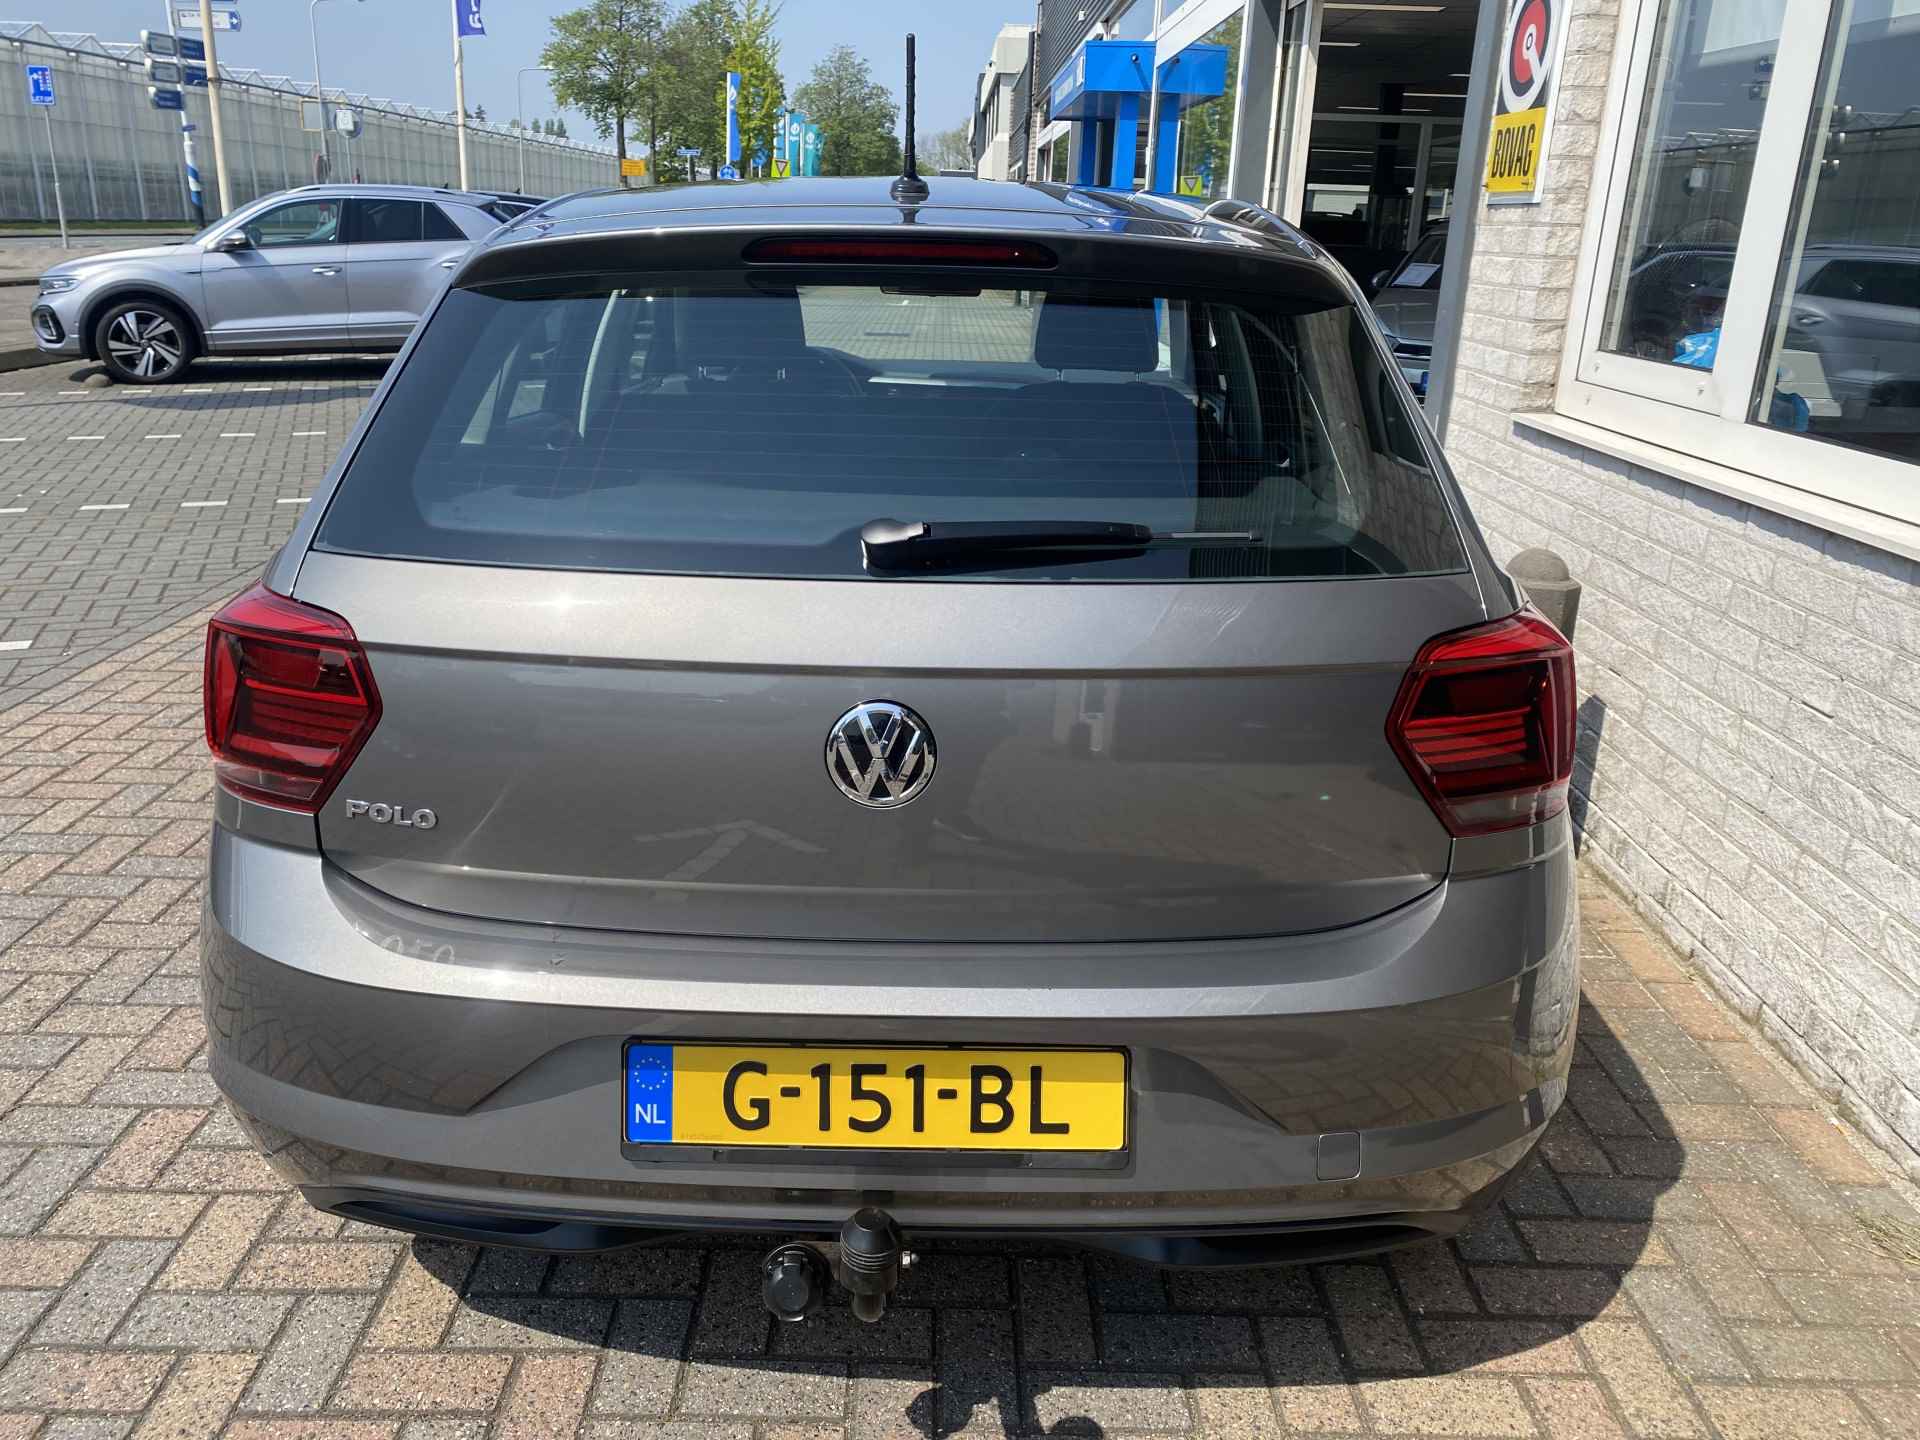 Volkswagen Polo 1.0 MPI Comfortline / APP-CONNECT/ AIRCO/ TREKHAAK/ BLUETOOTH/ CRUISE - 27/33